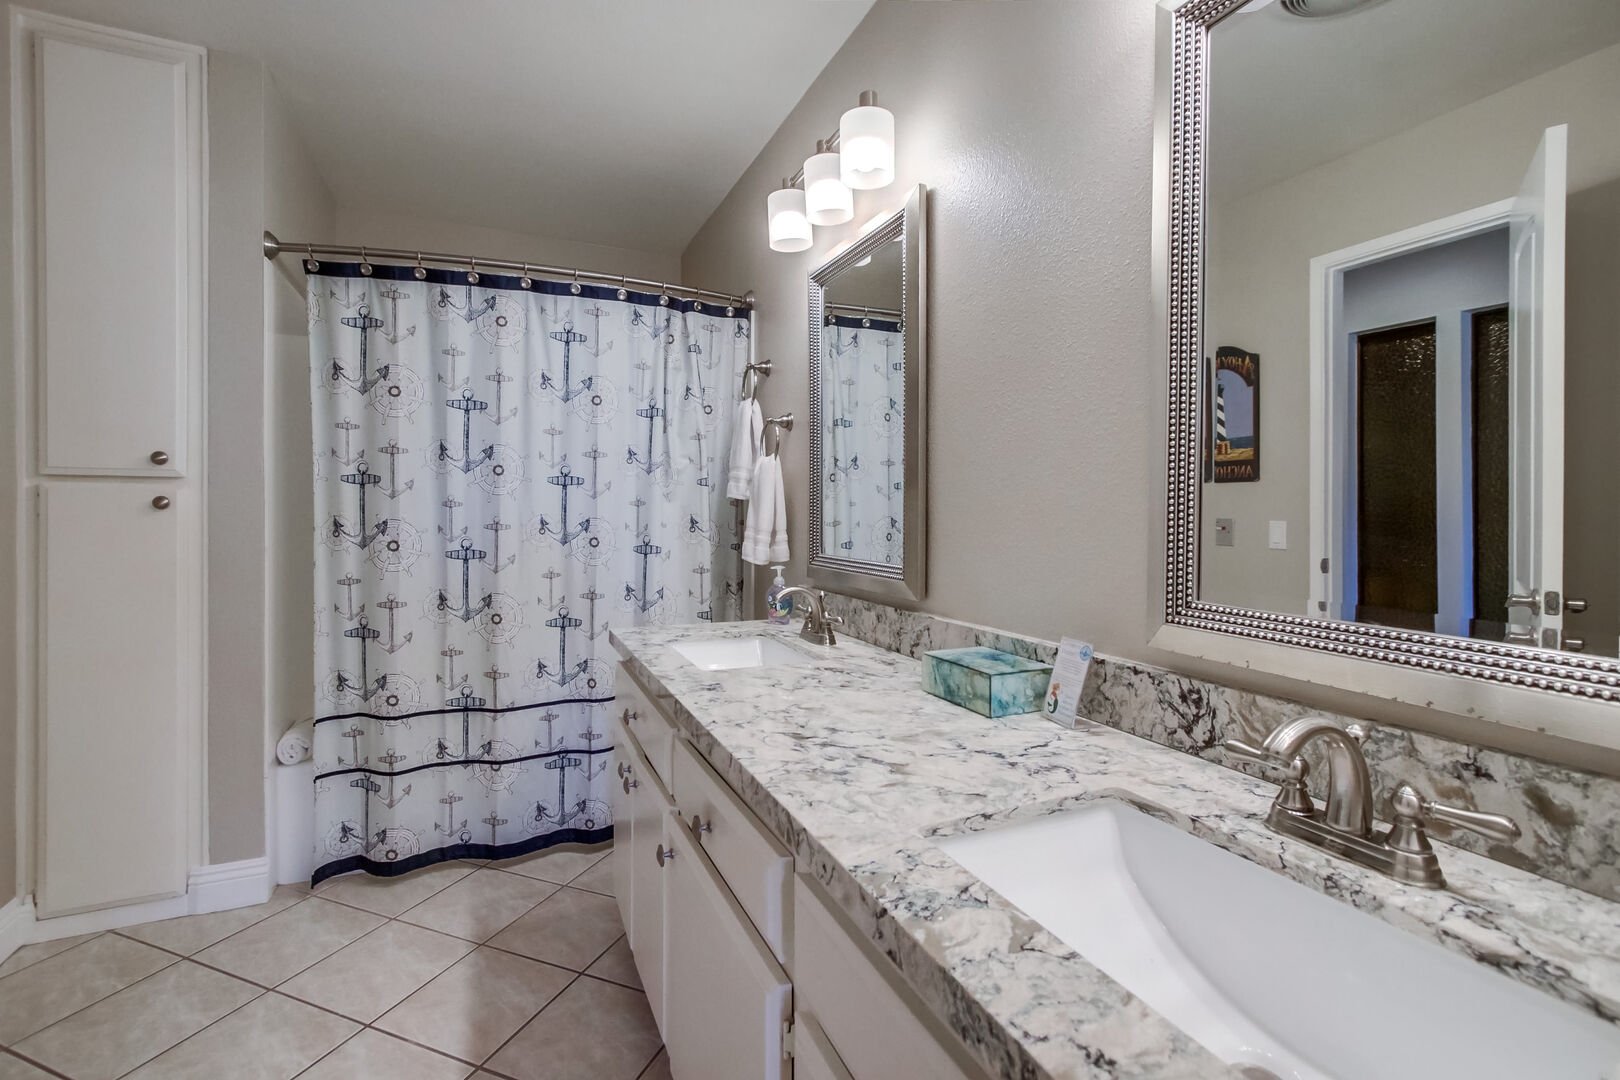 Shared bathroom with shower/ soaking tub, dual vanity, toilet, recessed lighting and storage cabinets